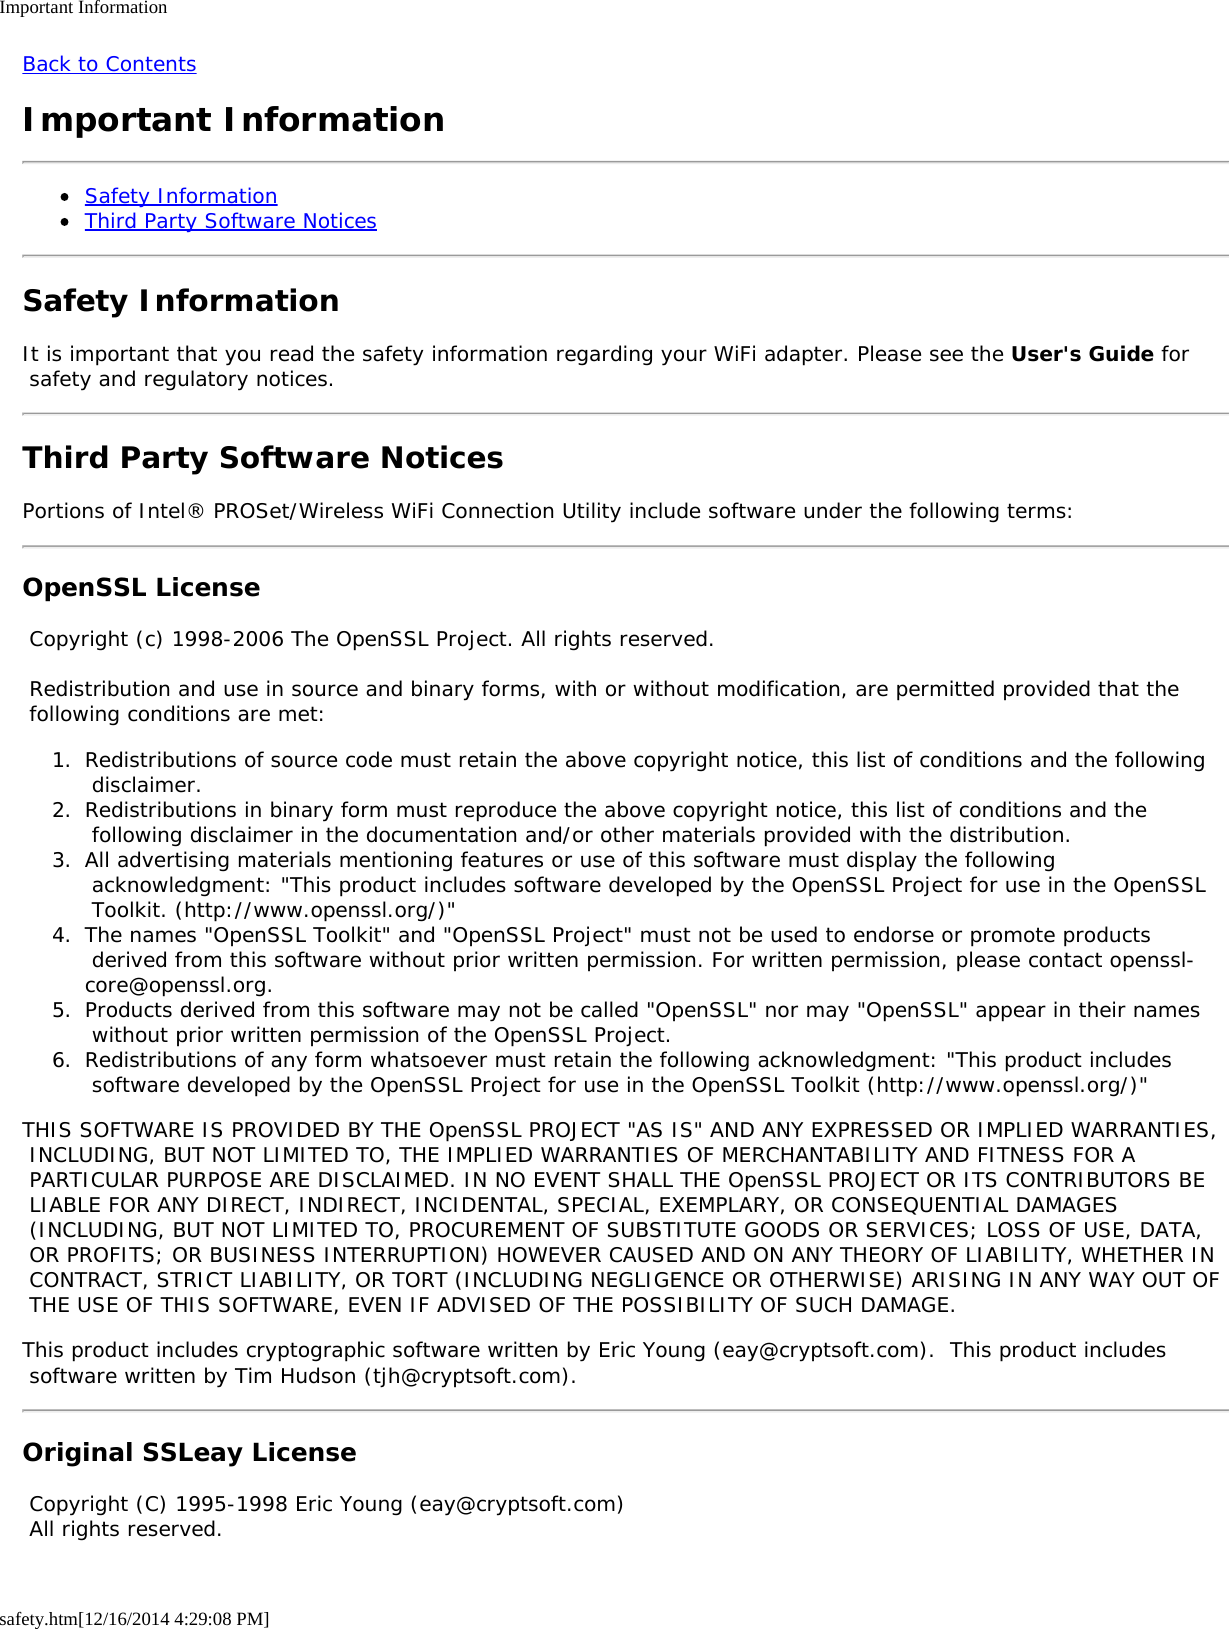 Important Informationsafety.htm[12/16/2014 4:29:08 PM]Back to ContentsImportant InformationSafety InformationThird Party Software NoticesSafety InformationIt is important that you read the safety information regarding your WiFi adapter. Please see the User&apos;s Guide for safety and regulatory notices.Third Party Software NoticesPortions of Intel® PROSet/Wireless WiFi Connection Utility include software under the following terms:OpenSSL License Copyright (c) 1998-2006 The OpenSSL Project. All rights reserved. Redistribution and use in source and binary forms, with or without modification, are permitted provided that the following conditions are met:1.  Redistributions of source code must retain the above copyright notice, this list of conditions and the following disclaimer.2.  Redistributions in binary form must reproduce the above copyright notice, this list of conditions and the following disclaimer in the documentation and/or other materials provided with the distribution.3.  All advertising materials mentioning features or use of this software must display the following acknowledgment: &quot;This product includes software developed by the OpenSSL Project for use in the OpenSSL Toolkit. (http://www.openssl.org/)&quot;4.  The names &quot;OpenSSL Toolkit&quot; and &quot;OpenSSL Project&quot; must not be used to endorse or promote products derived from this software without prior written permission. For written permission, please contact openssl-core@openssl.org.5.  Products derived from this software may not be called &quot;OpenSSL&quot; nor may &quot;OpenSSL&quot; appear in their names without prior written permission of the OpenSSL Project.6.  Redistributions of any form whatsoever must retain the following acknowledgment: &quot;This product includes software developed by the OpenSSL Project for use in the OpenSSL Toolkit (http://www.openssl.org/)&quot;THIS SOFTWARE IS PROVIDED BY THE OpenSSL PROJECT &quot;AS IS&quot; AND ANY EXPRESSED OR IMPLIED WARRANTIES, INCLUDING, BUT NOT LIMITED TO, THE IMPLIED WARRANTIES OF MERCHANTABILITY AND FITNESS FOR A PARTICULAR PURPOSE ARE DISCLAIMED. IN NO EVENT SHALL THE OpenSSL PROJECT OR ITS CONTRIBUTORS BE LIABLE FOR ANY DIRECT, INDIRECT, INCIDENTAL, SPECIAL, EXEMPLARY, OR CONSEQUENTIAL DAMAGES (INCLUDING, BUT NOT LIMITED TO, PROCUREMENT OF SUBSTITUTE GOODS OR SERVICES; LOSS OF USE, DATA, OR PROFITS; OR BUSINESS INTERRUPTION) HOWEVER CAUSED AND ON ANY THEORY OF LIABILITY, WHETHER IN CONTRACT, STRICT LIABILITY, OR TORT (INCLUDING NEGLIGENCE OR OTHERWISE) ARISING IN ANY WAY OUT OF THE USE OF THIS SOFTWARE, EVEN IF ADVISED OF THE POSSIBILITY OF SUCH DAMAGE.This product includes cryptographic software written by Eric Young (eay@cryptsoft.com).  This product includes software written by Tim Hudson (tjh@cryptsoft.com).Original SSLeay License Copyright (C) 1995-1998 Eric Young (eay@cryptsoft.com) All rights reserved.